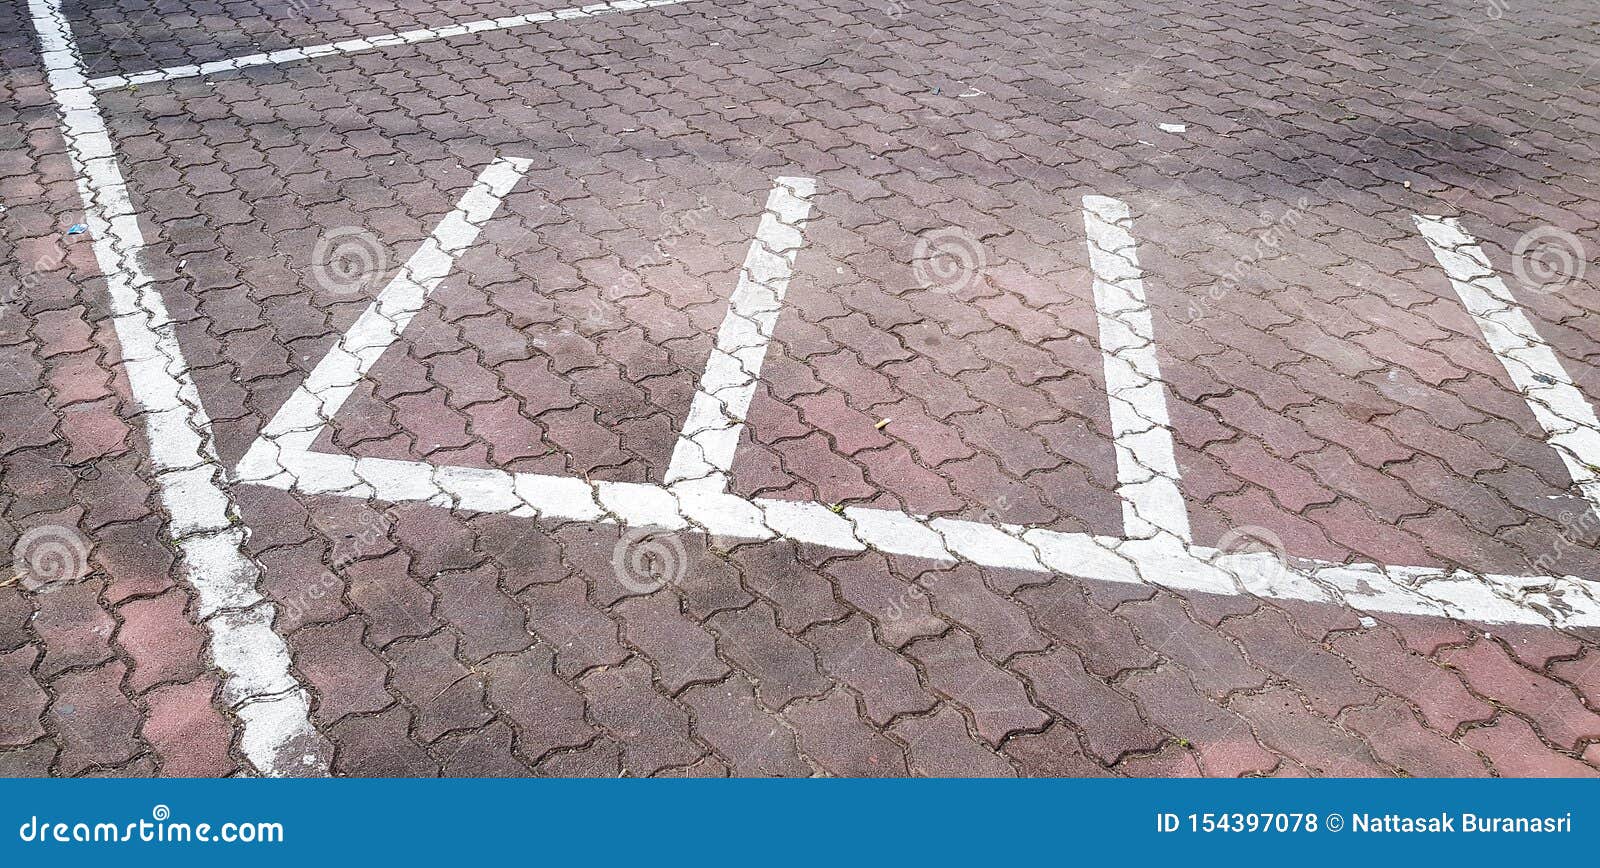 Motorcycle Or Car Parking With White Painted Line On Brown Brick